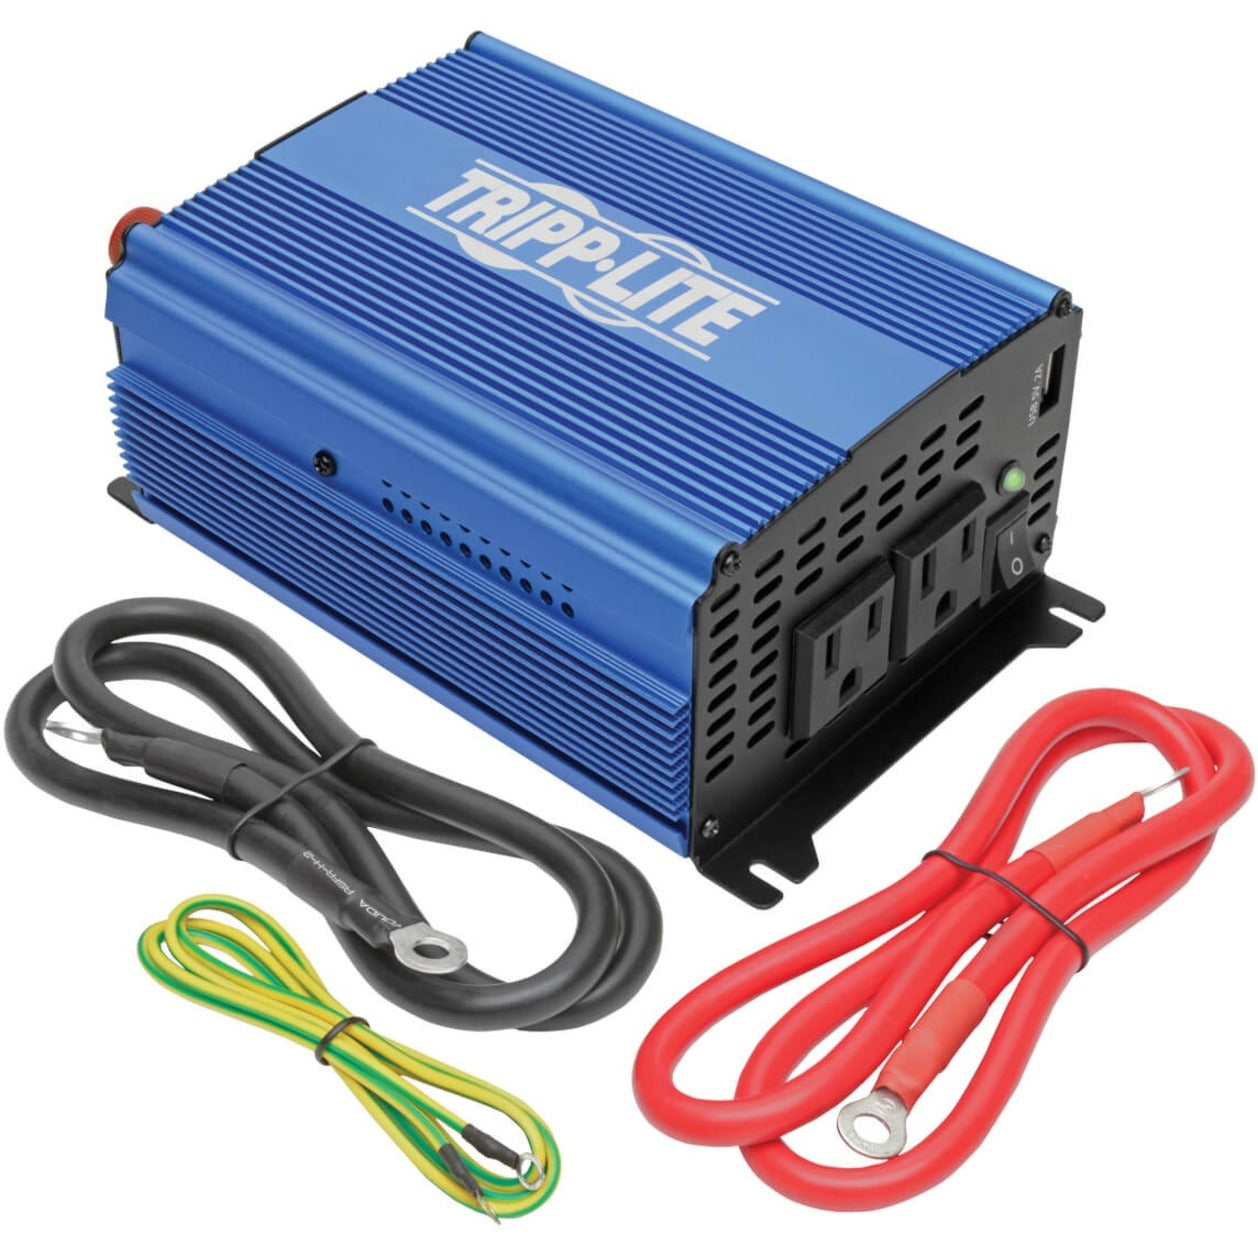 Tripp Lite PINV1000 Power Inverter, 1000W Light-Duty Compact with 2 AC/1 USB - 2.0A/Battery Cables